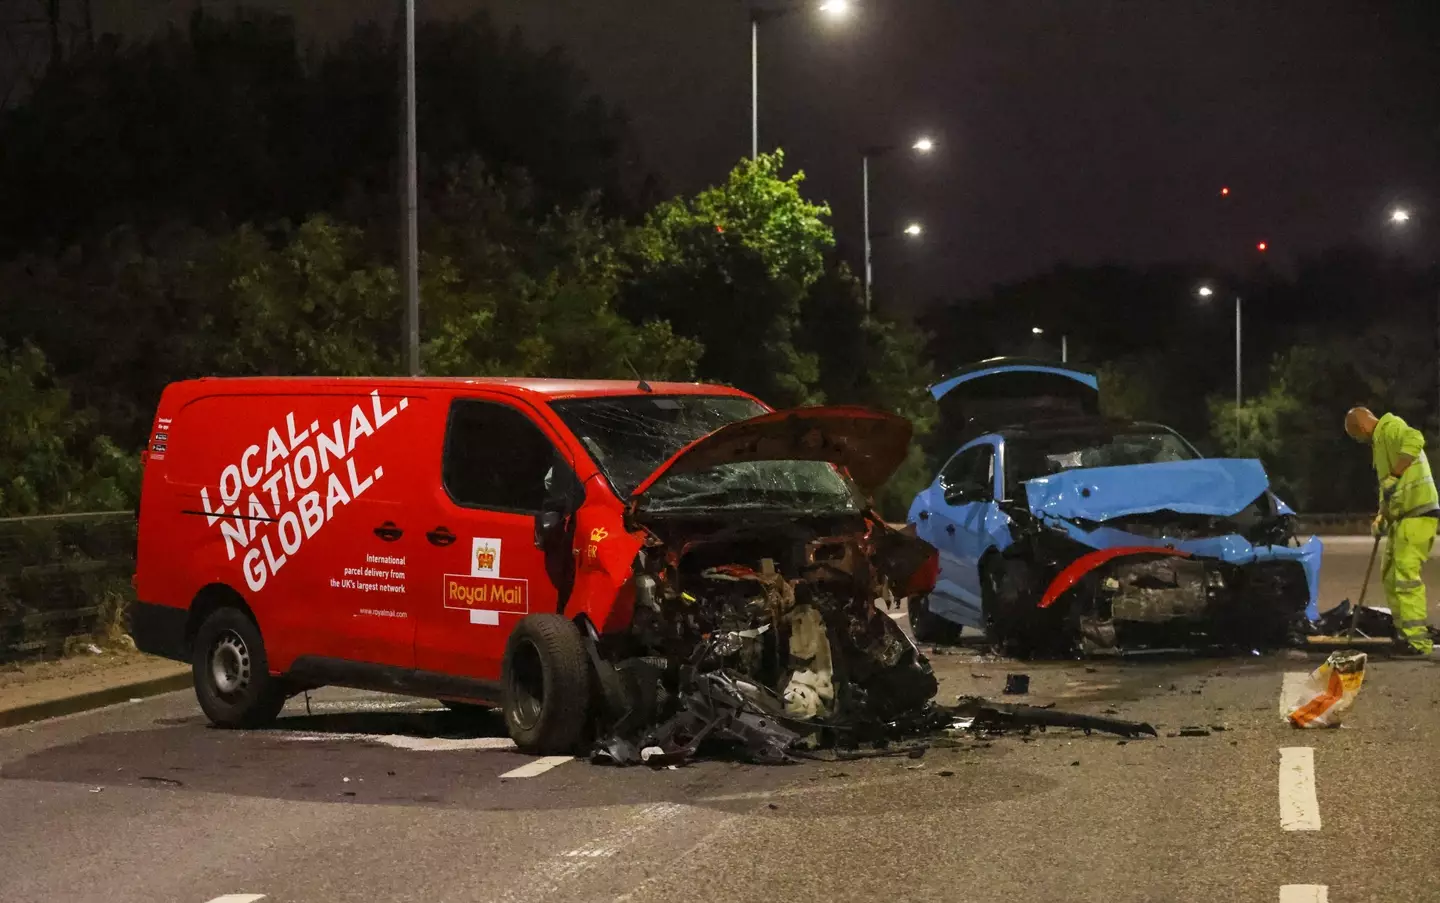 A group of young students were injured after their Lamborghini crashed into a Royal Mail van.